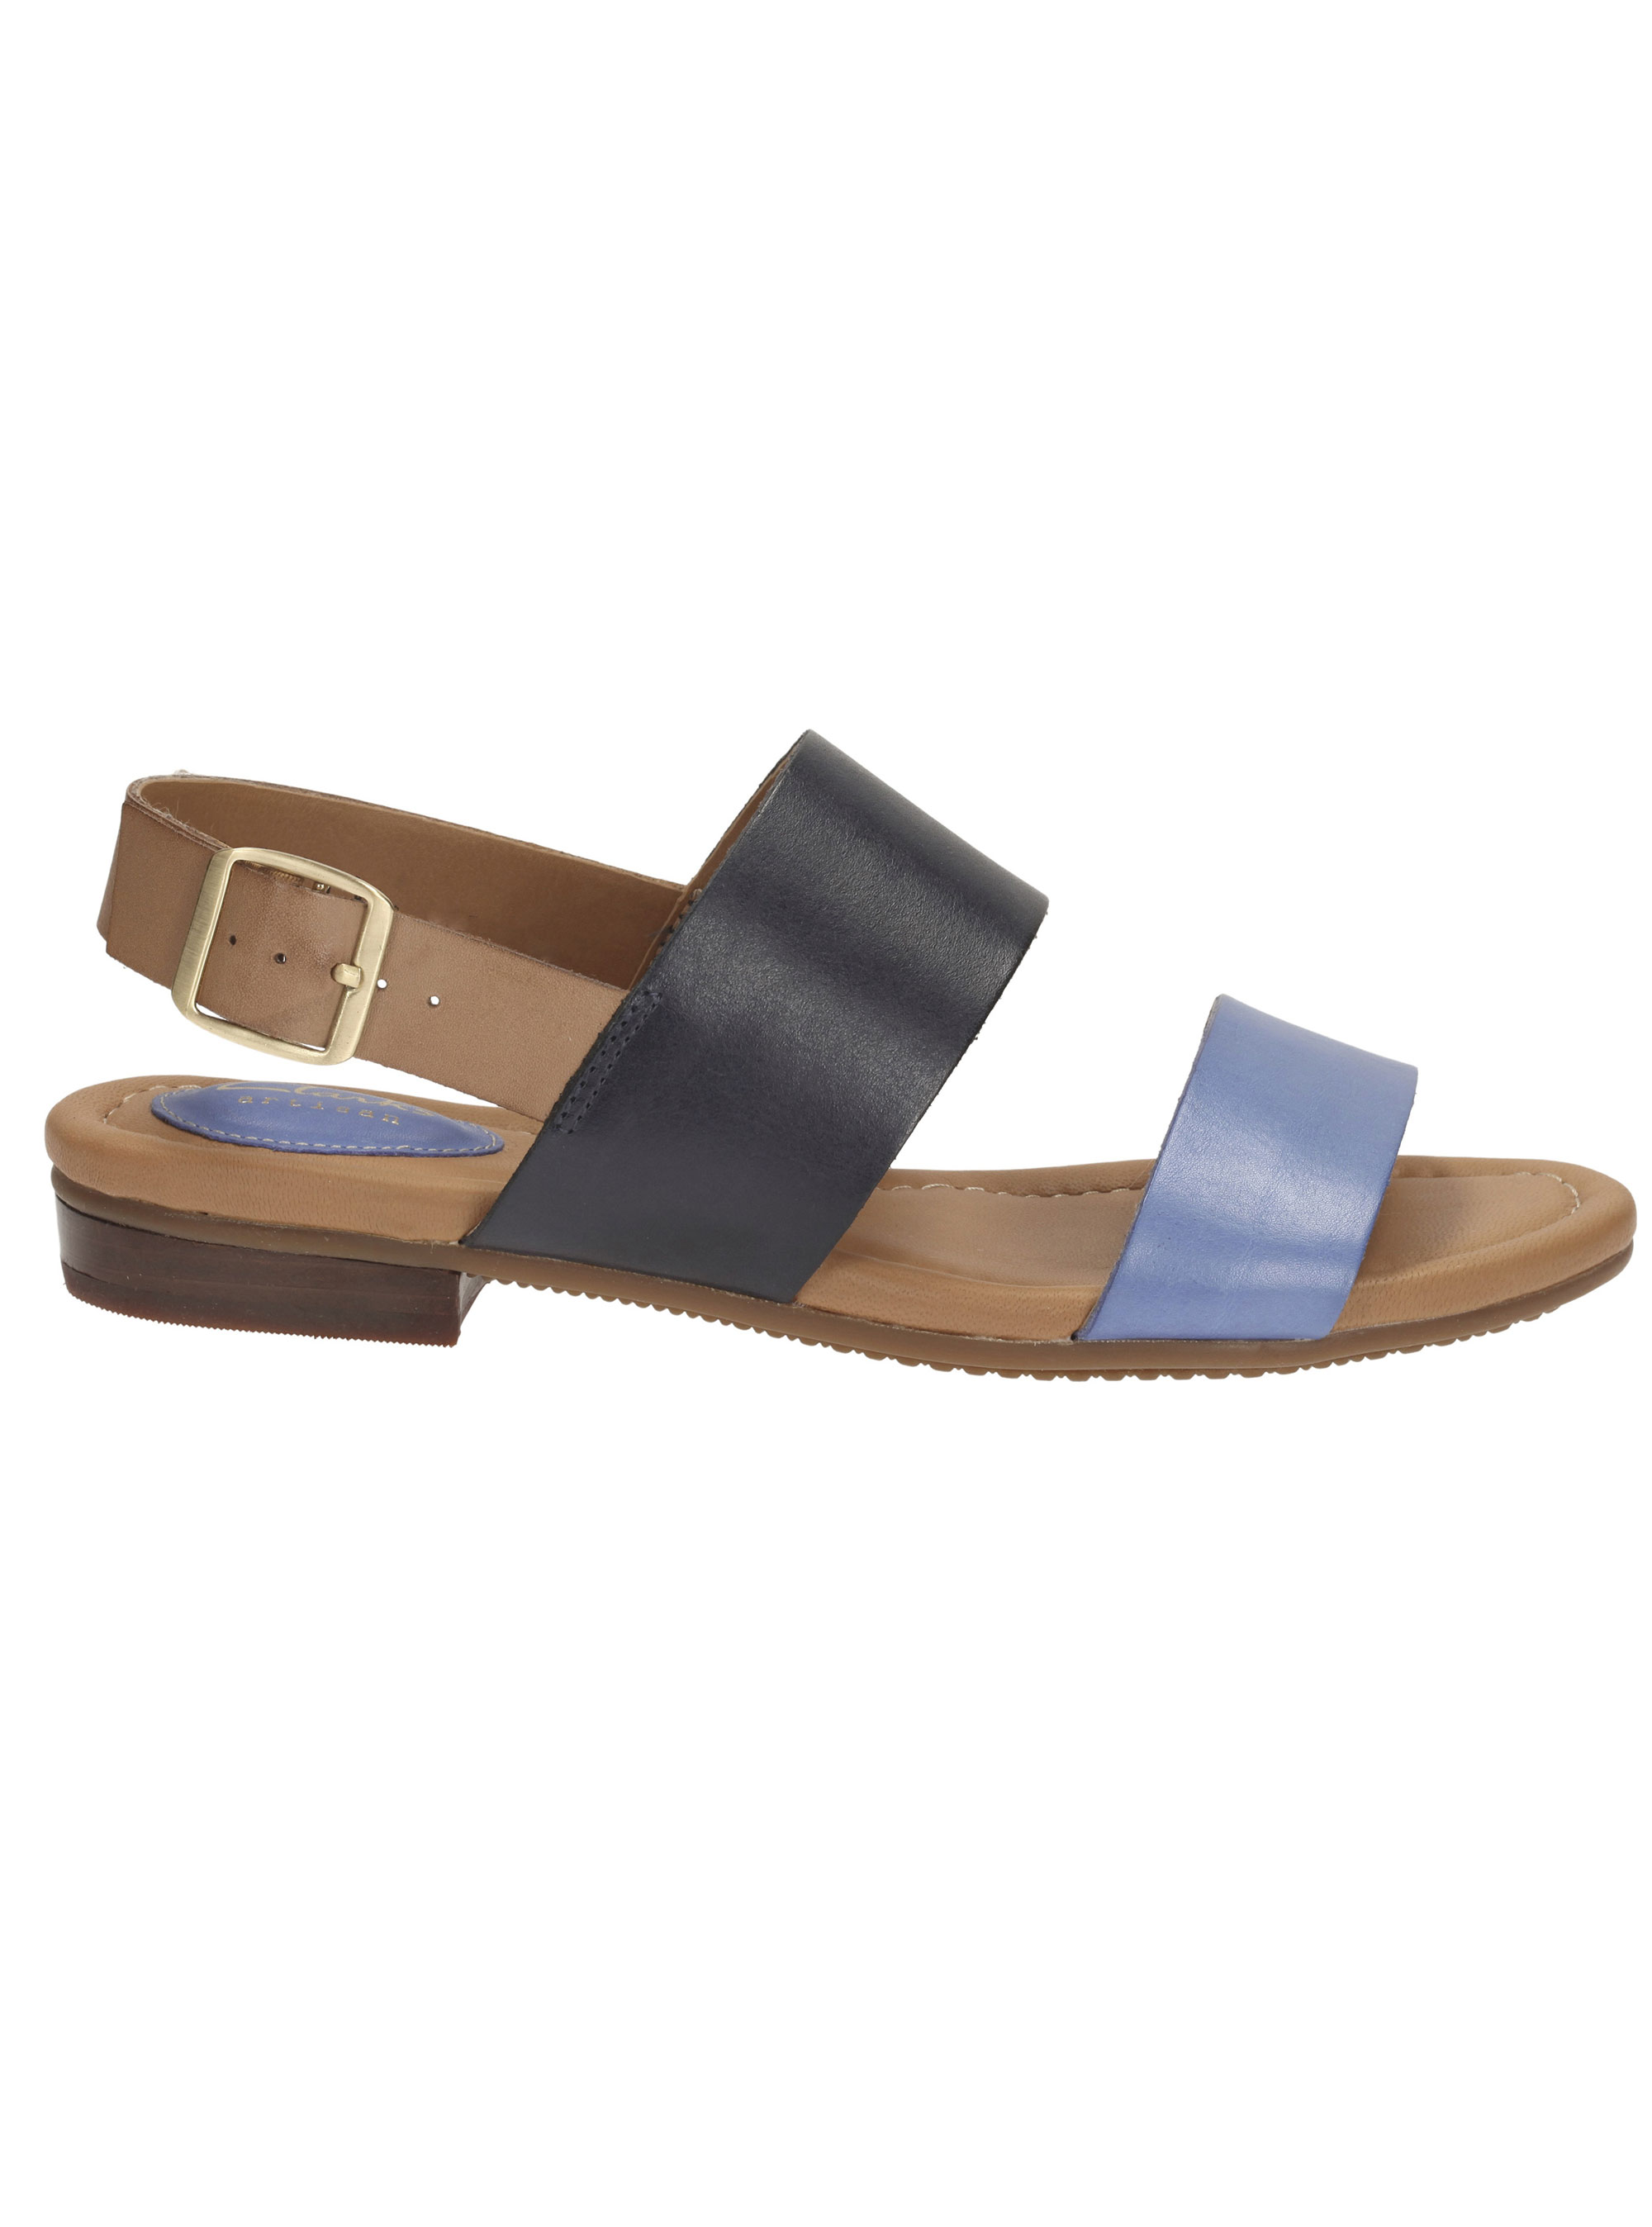 Summer Sandals - Leather sandals, £35, Clarks - Woman And Home